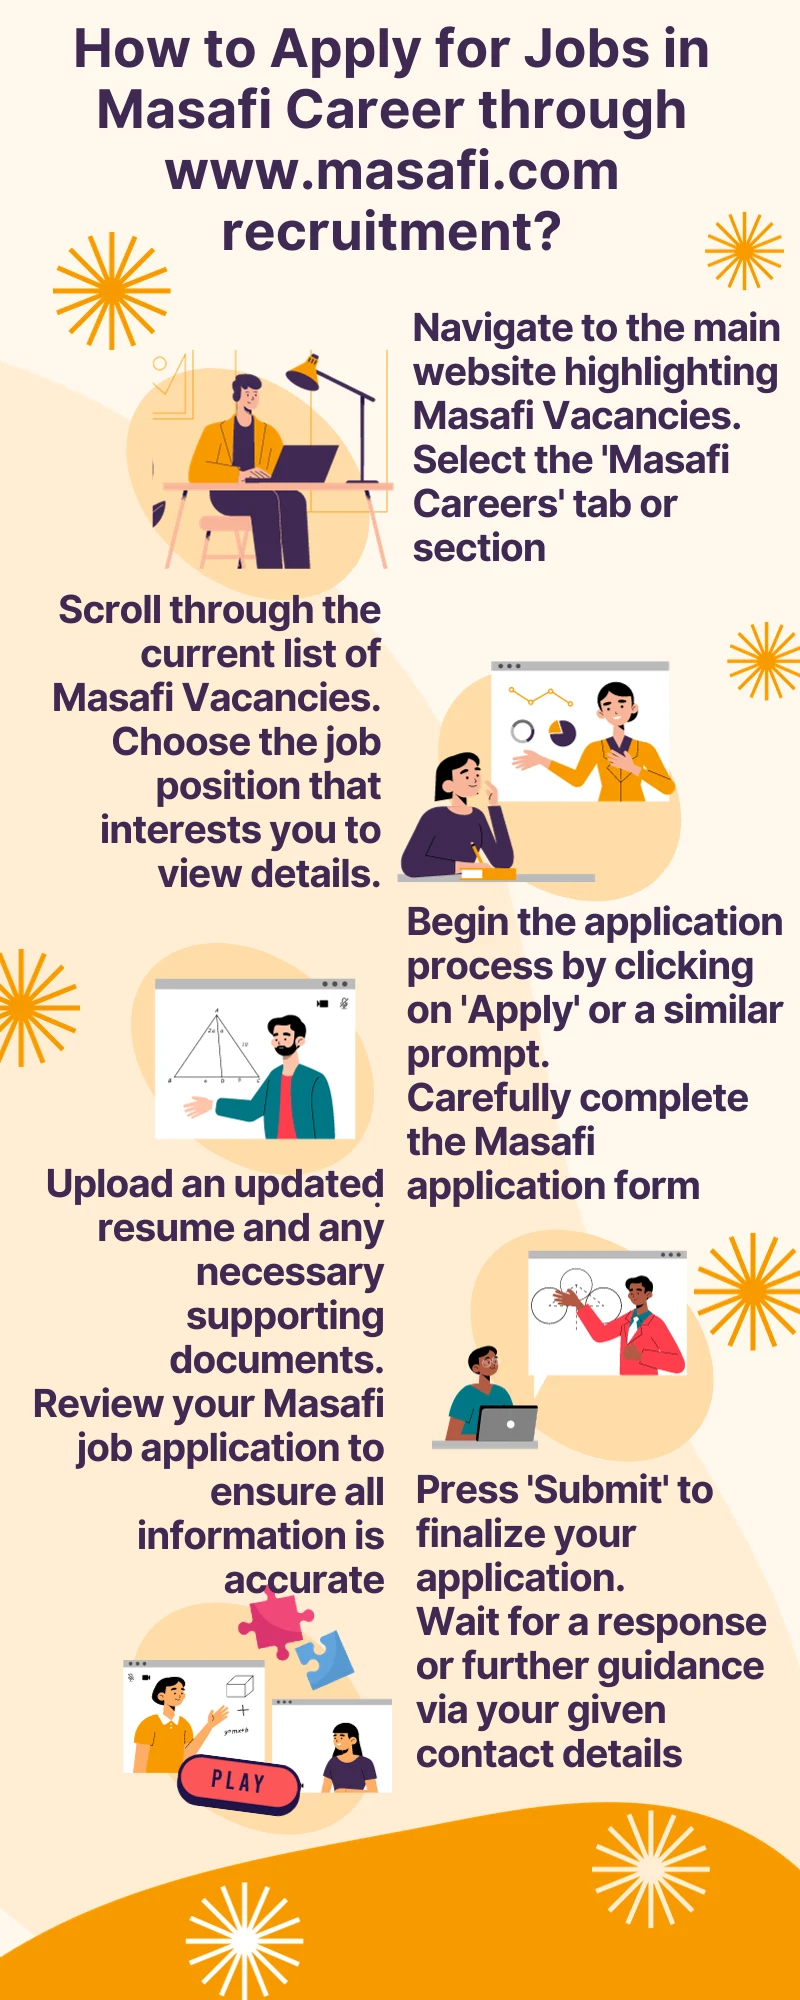 How to Apply for Jobs in Masafi Career through www.masafi.com recruitment?